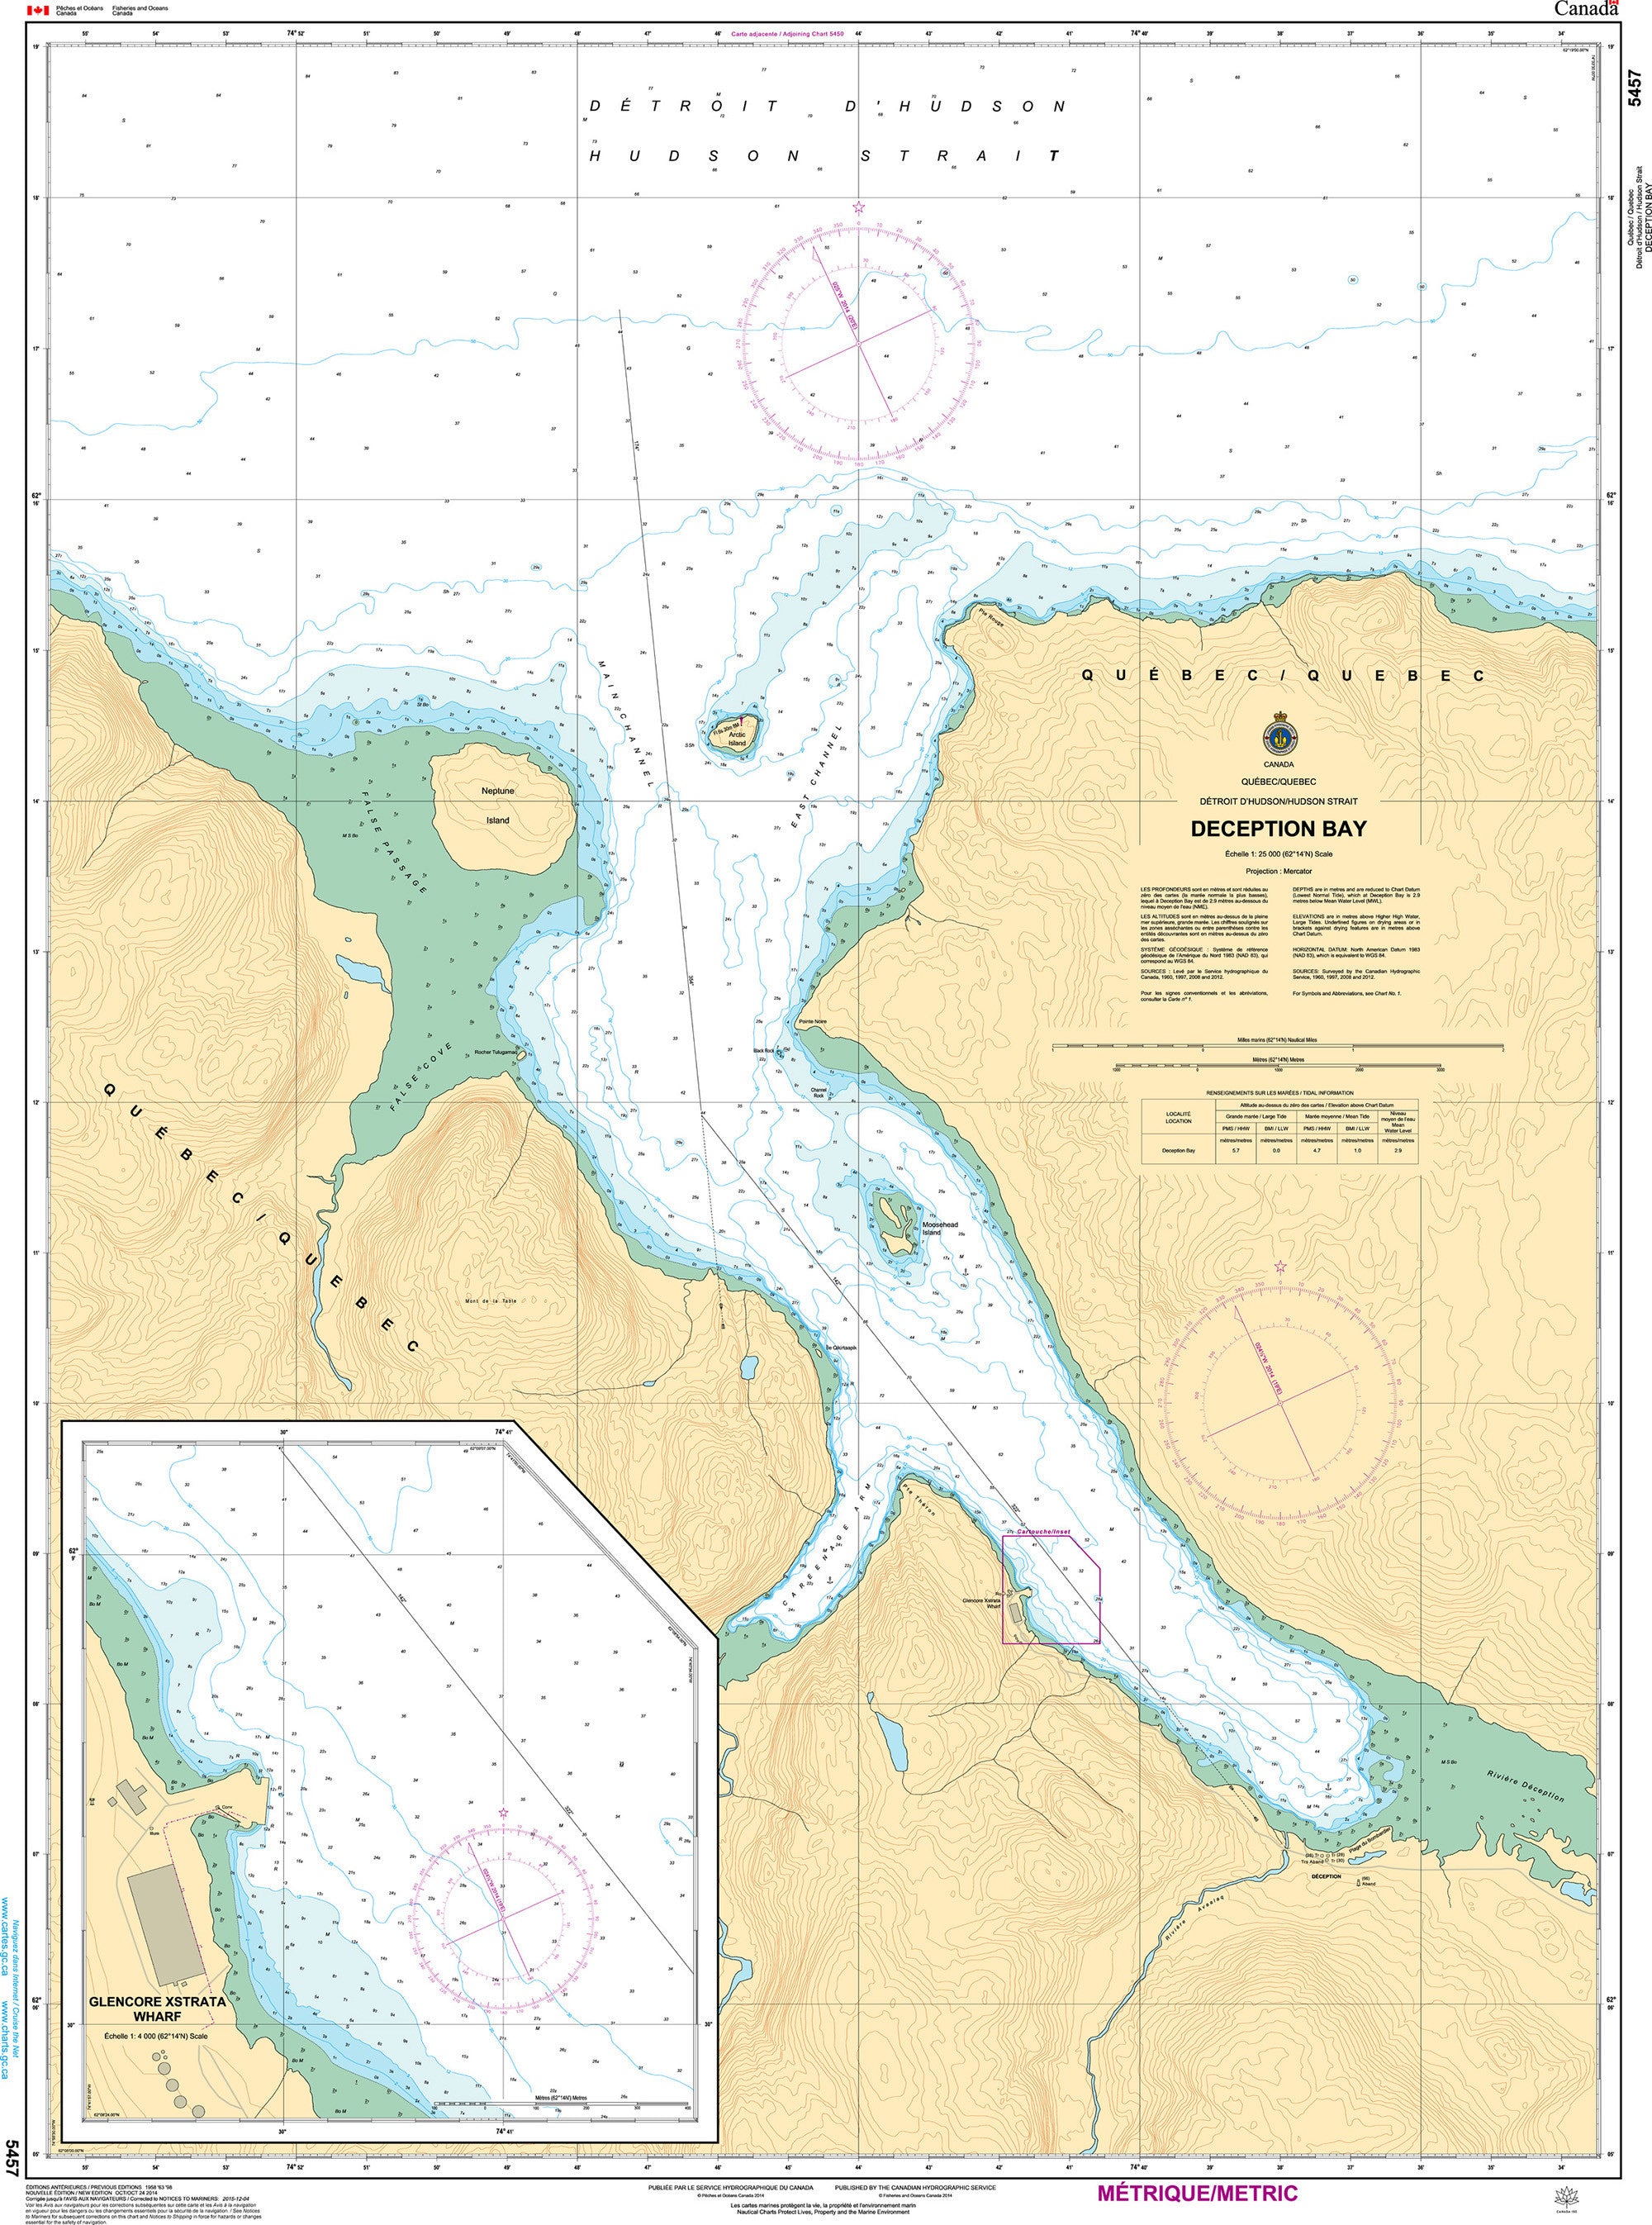 Canadian Hydrographic Service Nautical Chart CHS5457: Deception Bay